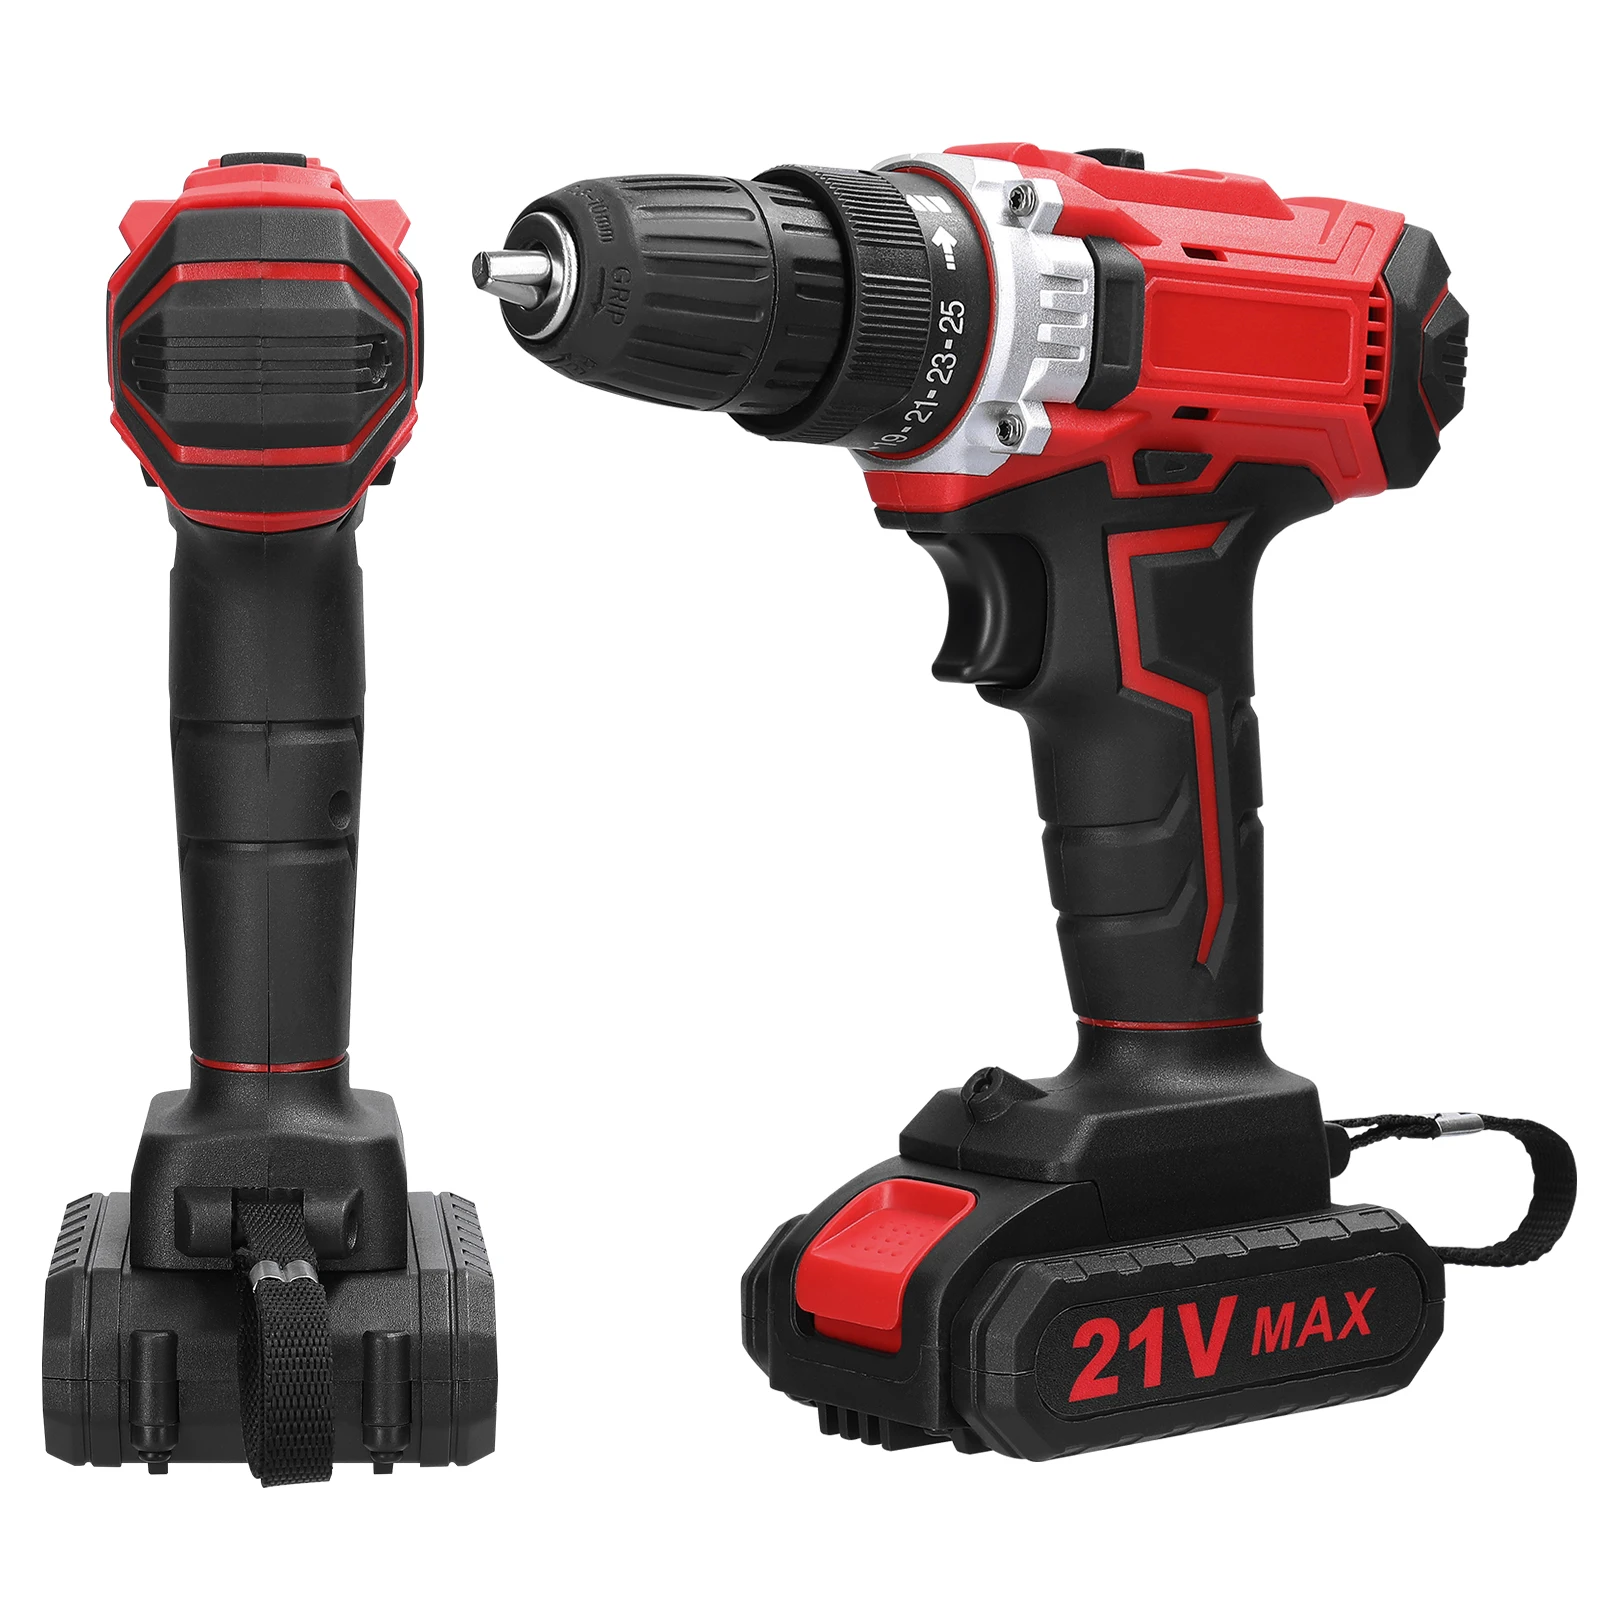 

21V Electric Drill 2 Speeds Control Stepless Speed Regulation Rotation Ways Adjustment 25 Gears of Torques Adjustable Drill